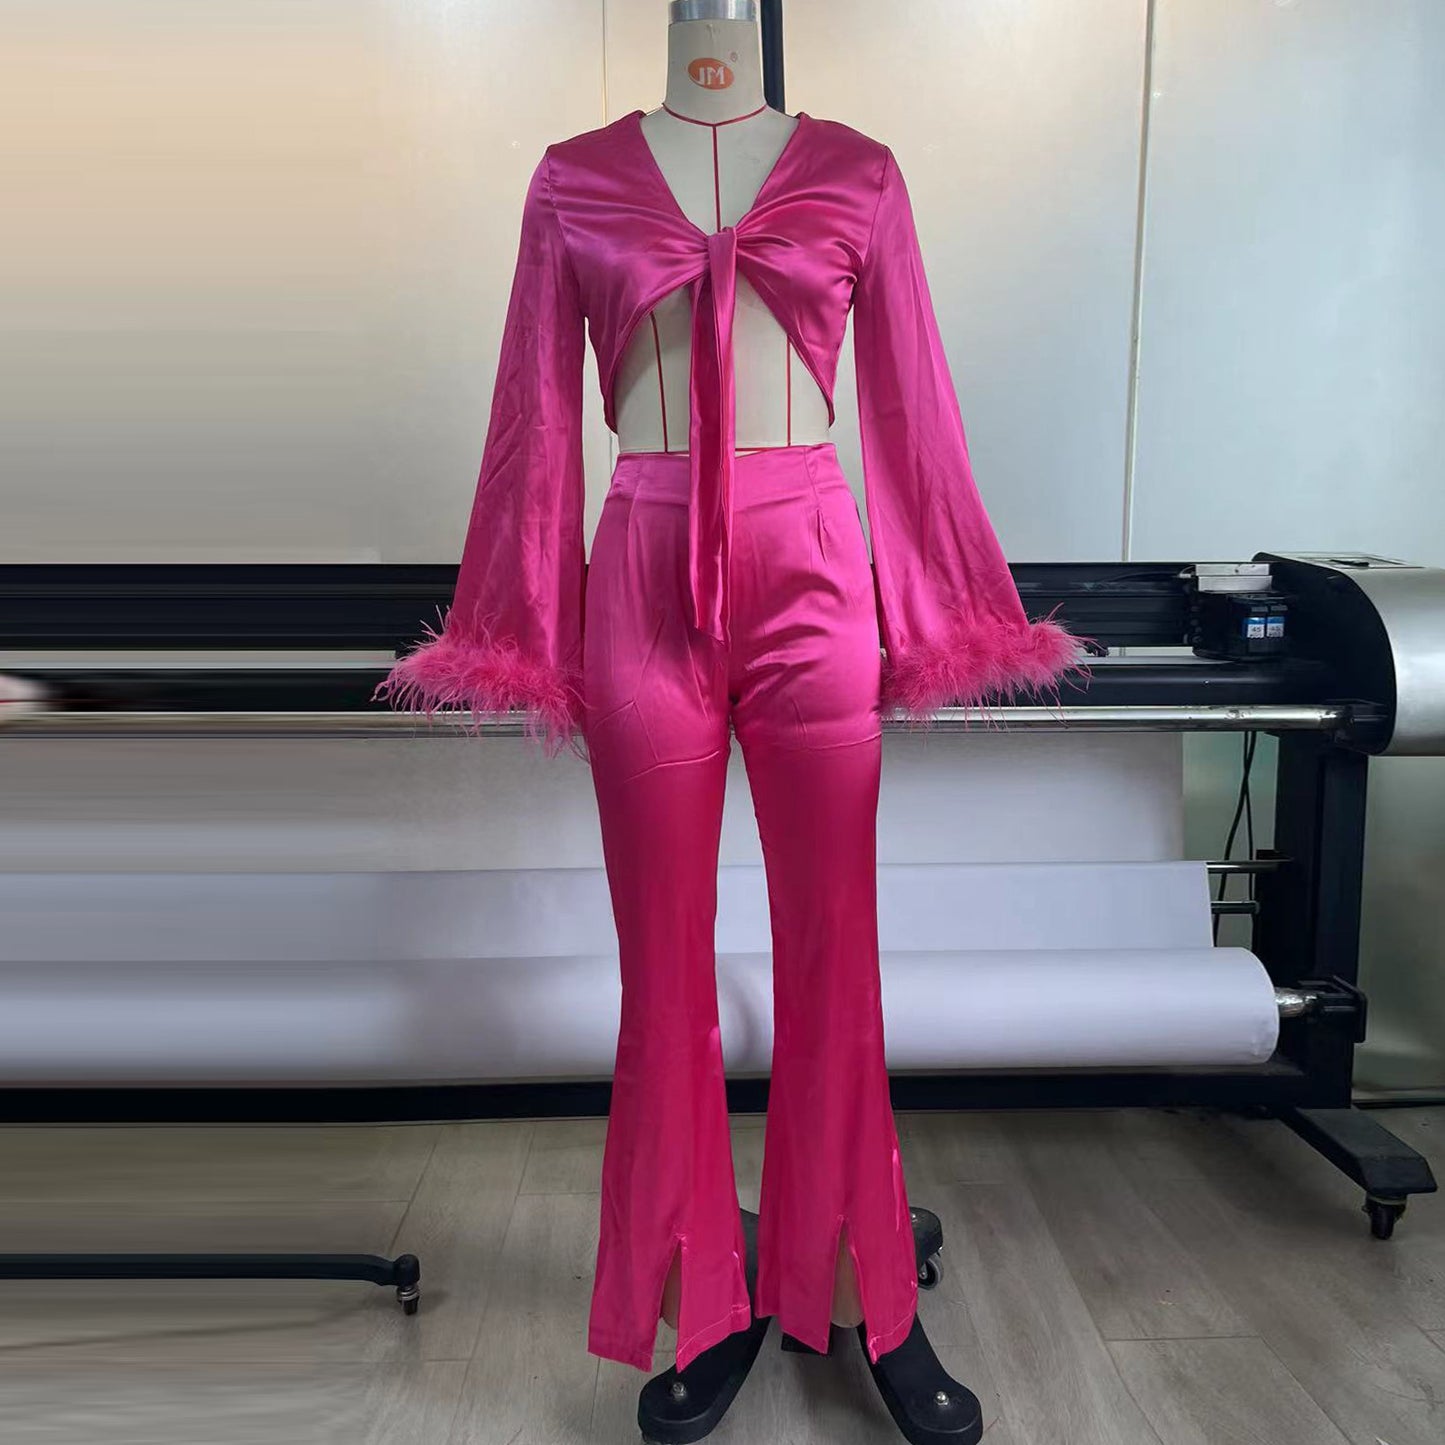 Hot Pink Outfit | Silk & Feather Hot Pink Pants Outfit 2-piece set